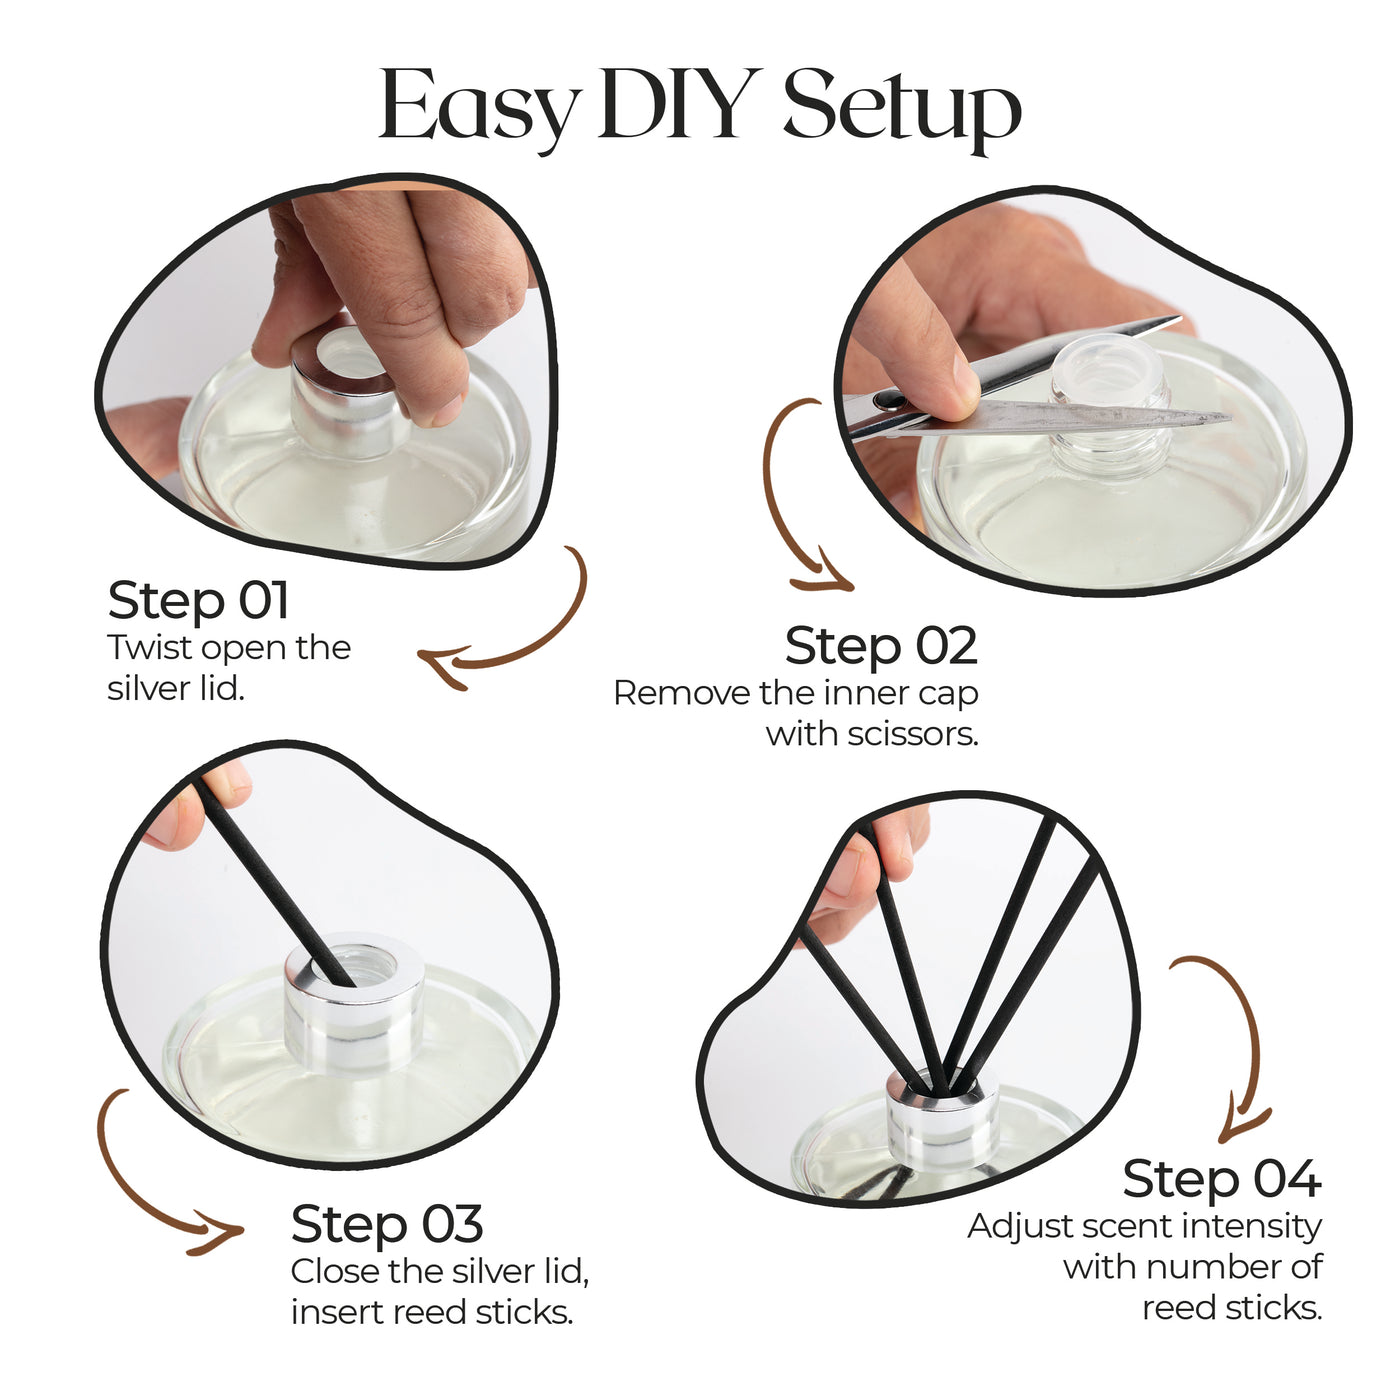 An instructional graphic showing the simple steps to set up a Sweet Memoir reed diffuser, including opening the bottle, inserting the reeds, and adjusting for the desired fragrance intensity.